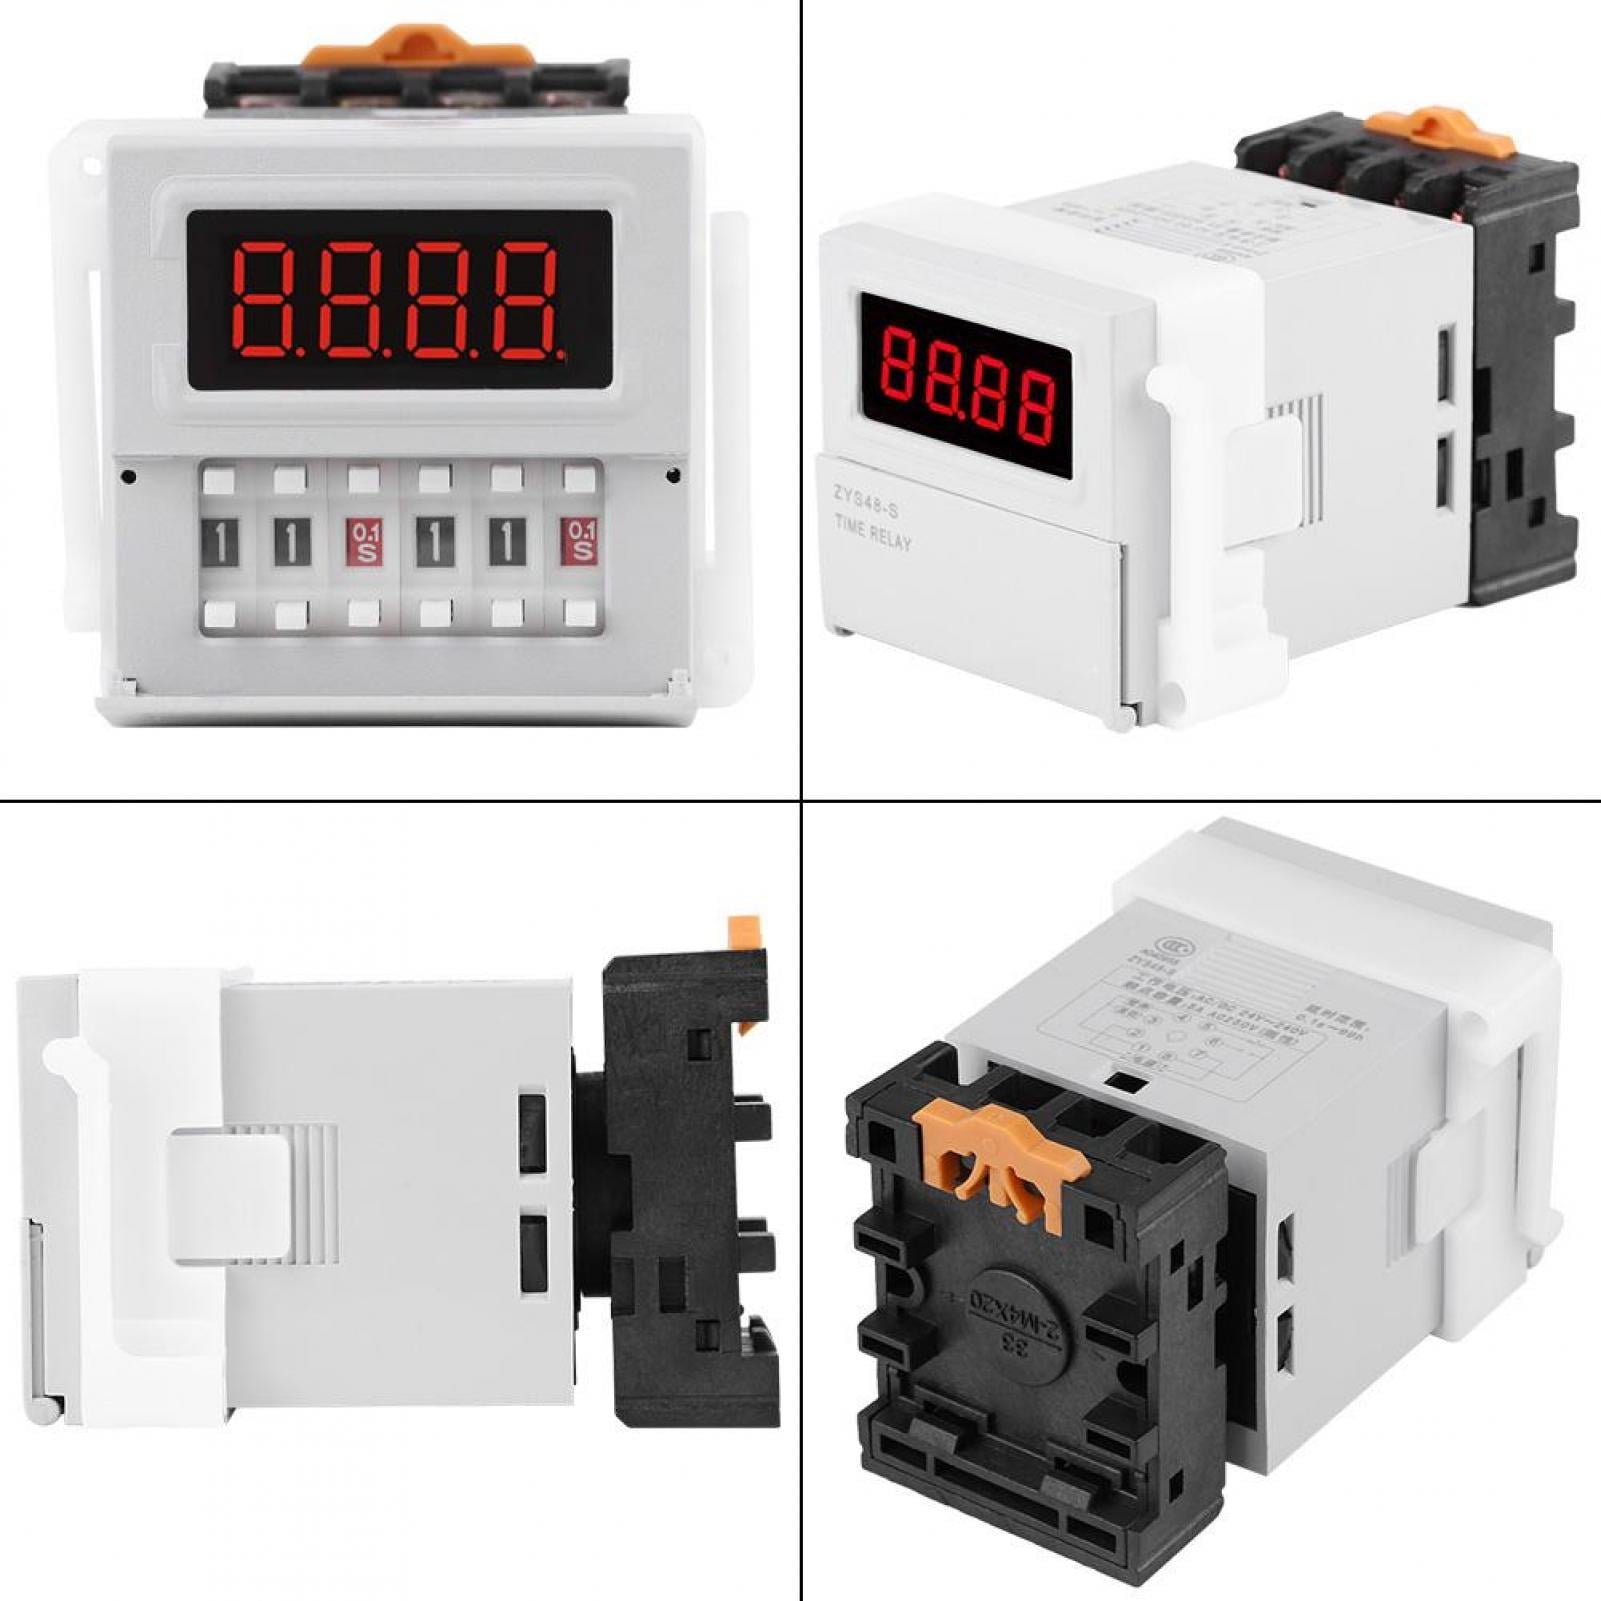 Digital Display Time Relay,ZYS48-S White,1PC AC/DC 24-240V,Digital Cycle Time Timer,Switch Delay Relay 0.1S-99H,LED Display 